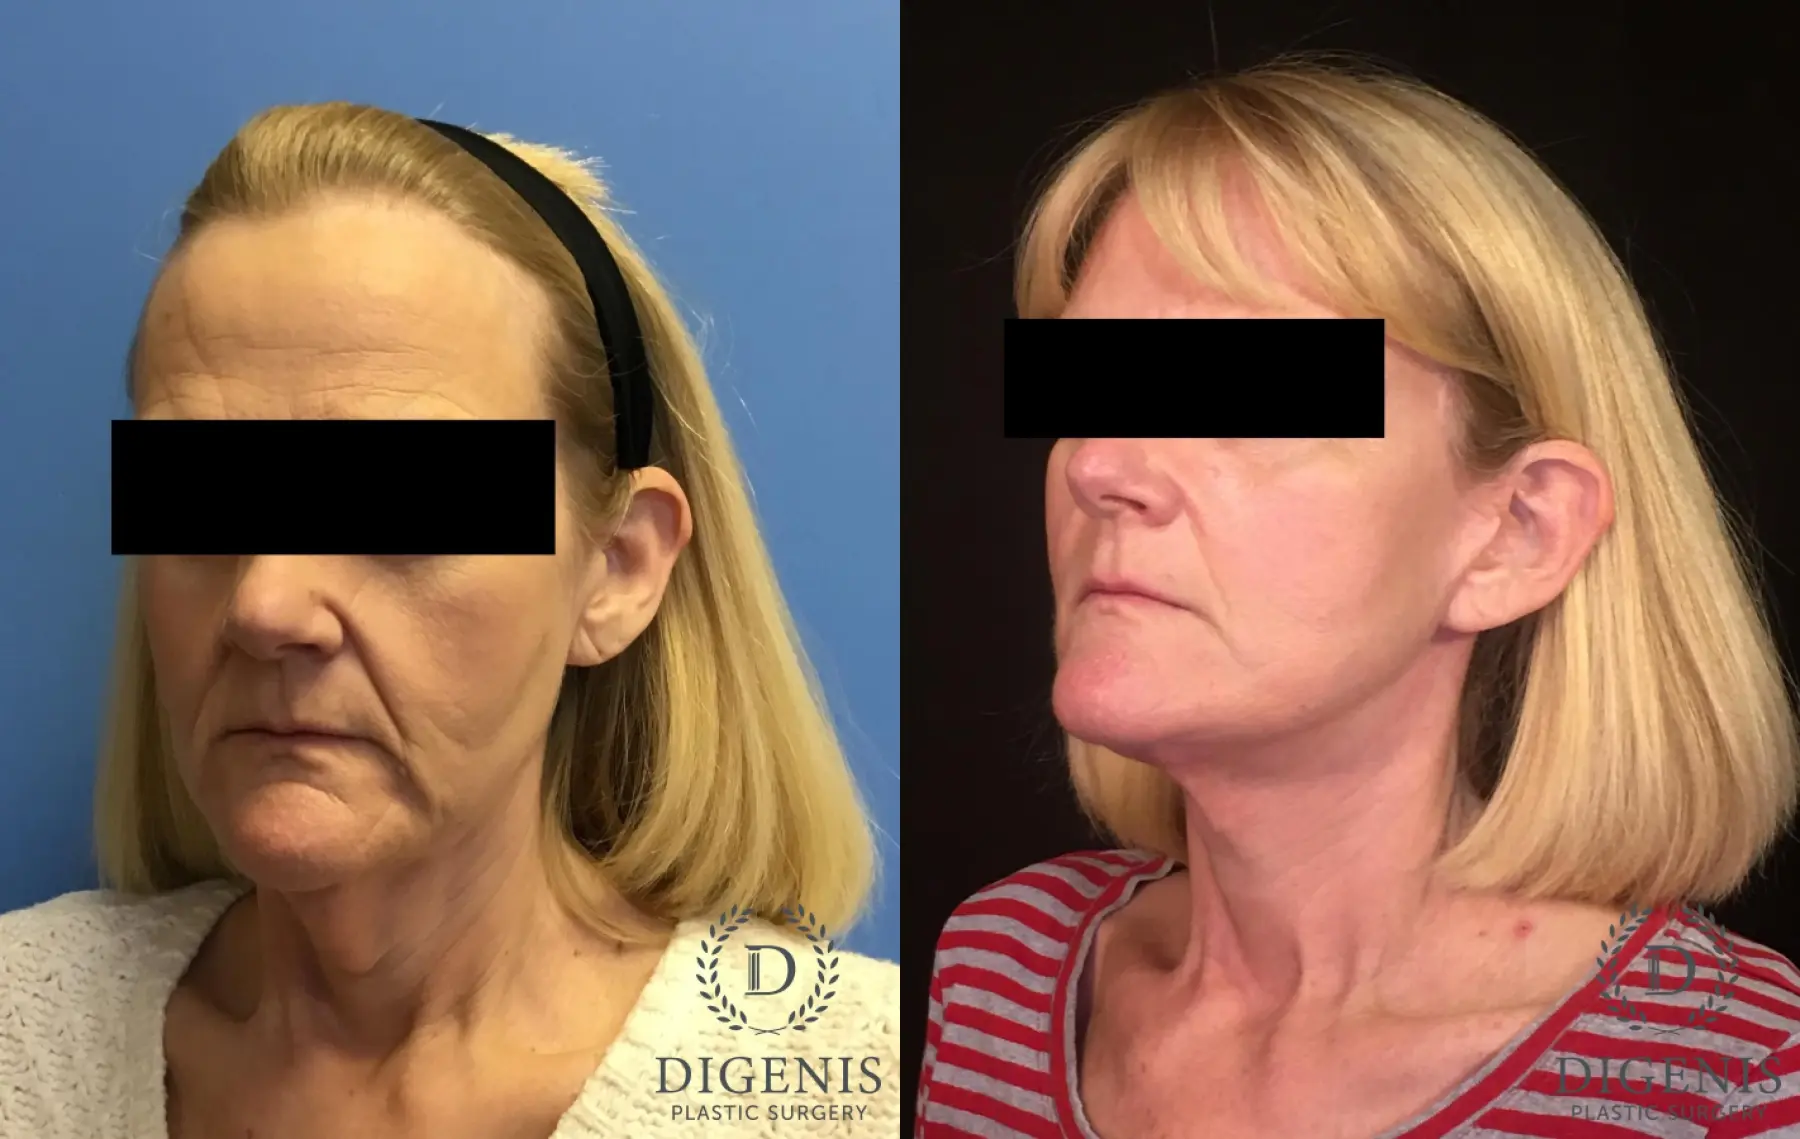 Facelift: Patient 4 - Before and After 4